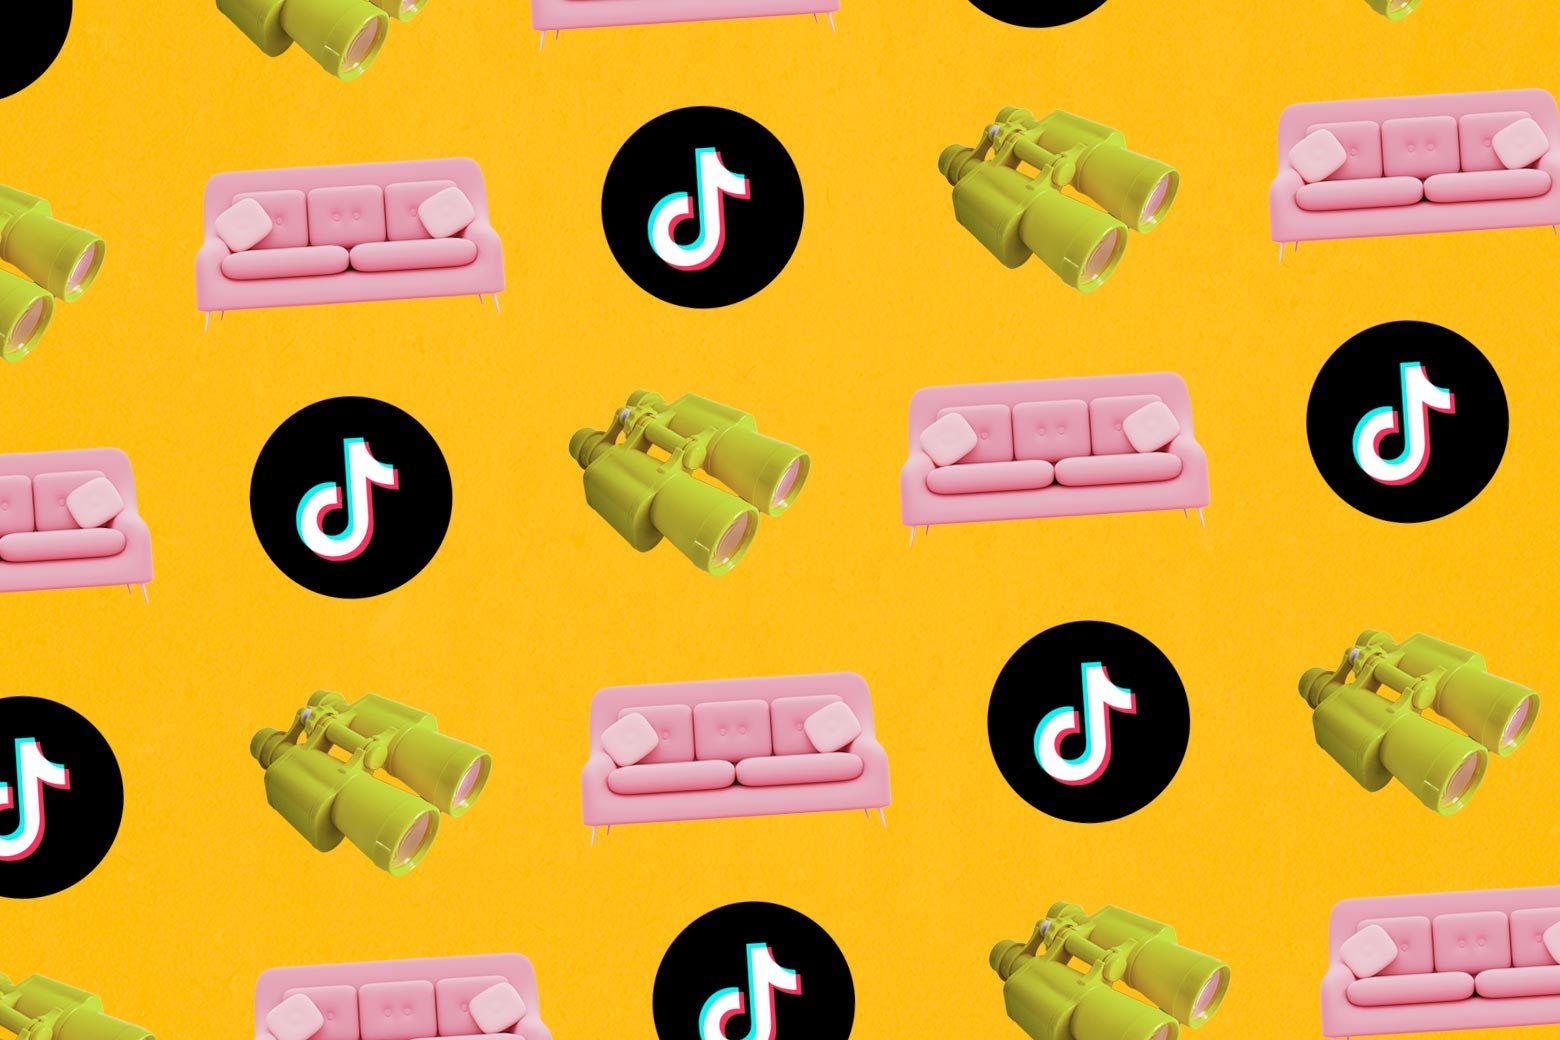 A collage of a sofa, the TikTok logo, and binoculars.